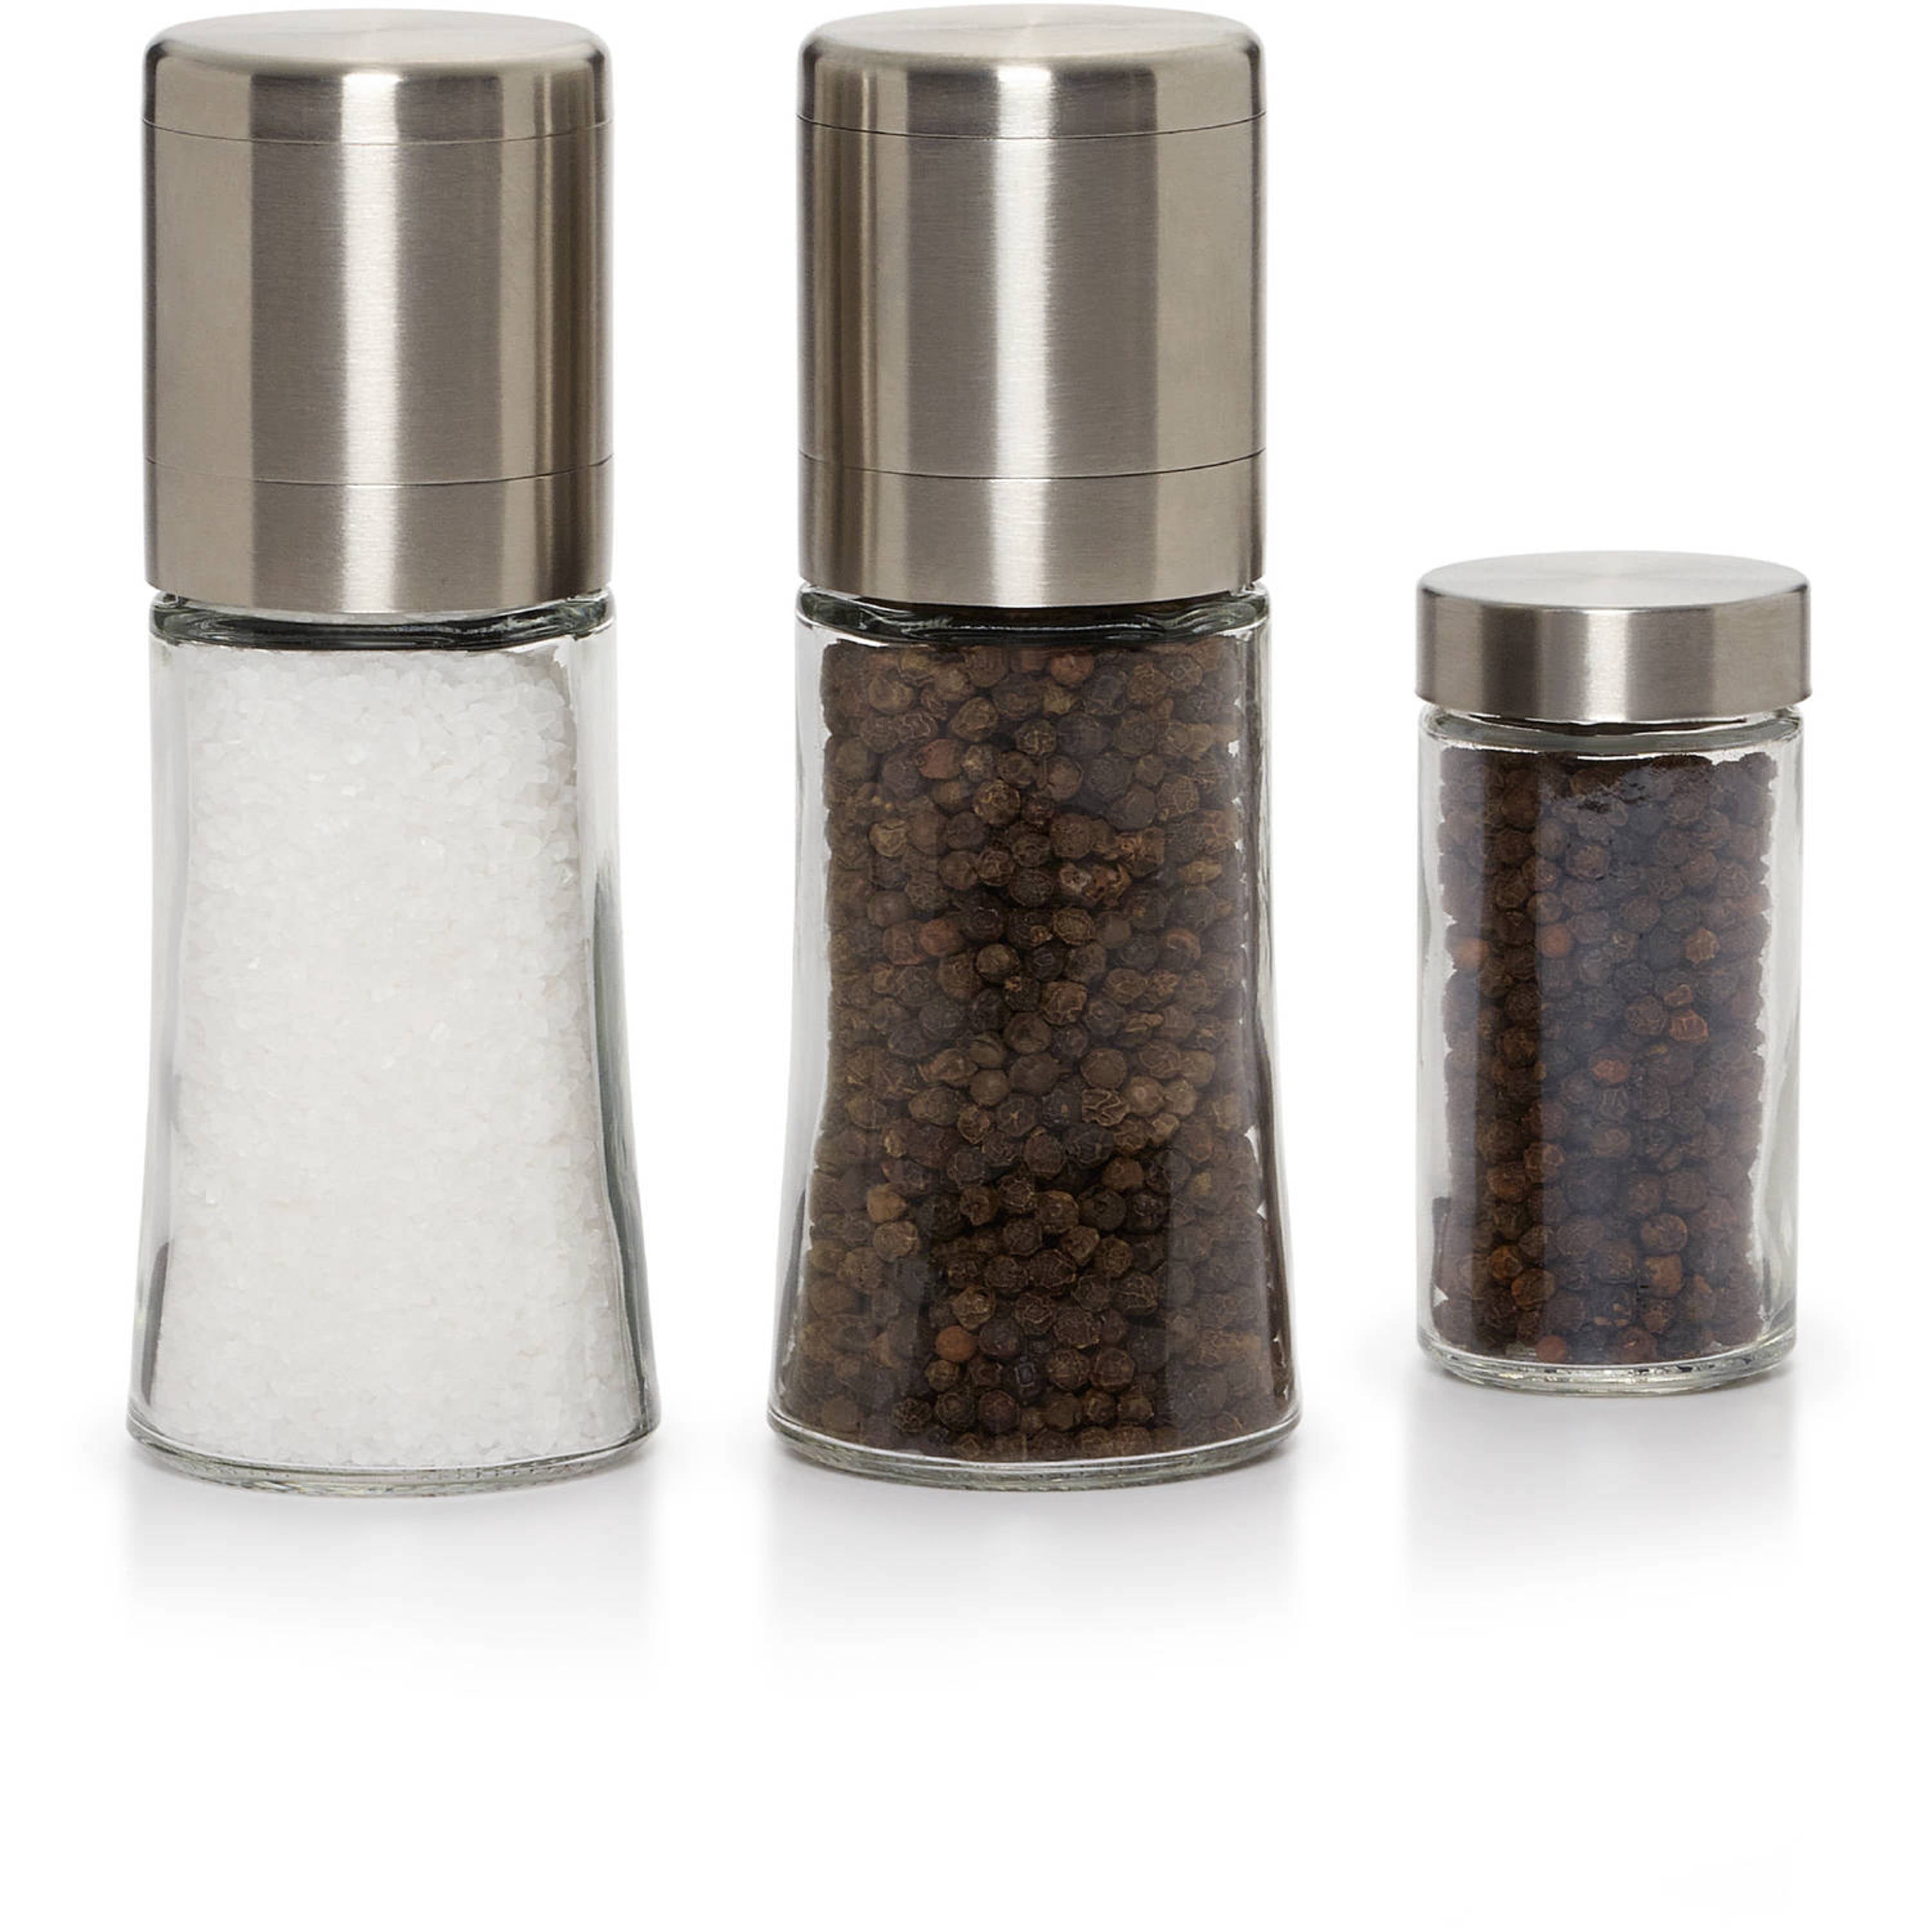 Bueautybox Stainless Steel Pepper Mills with One Hand Stands Mini